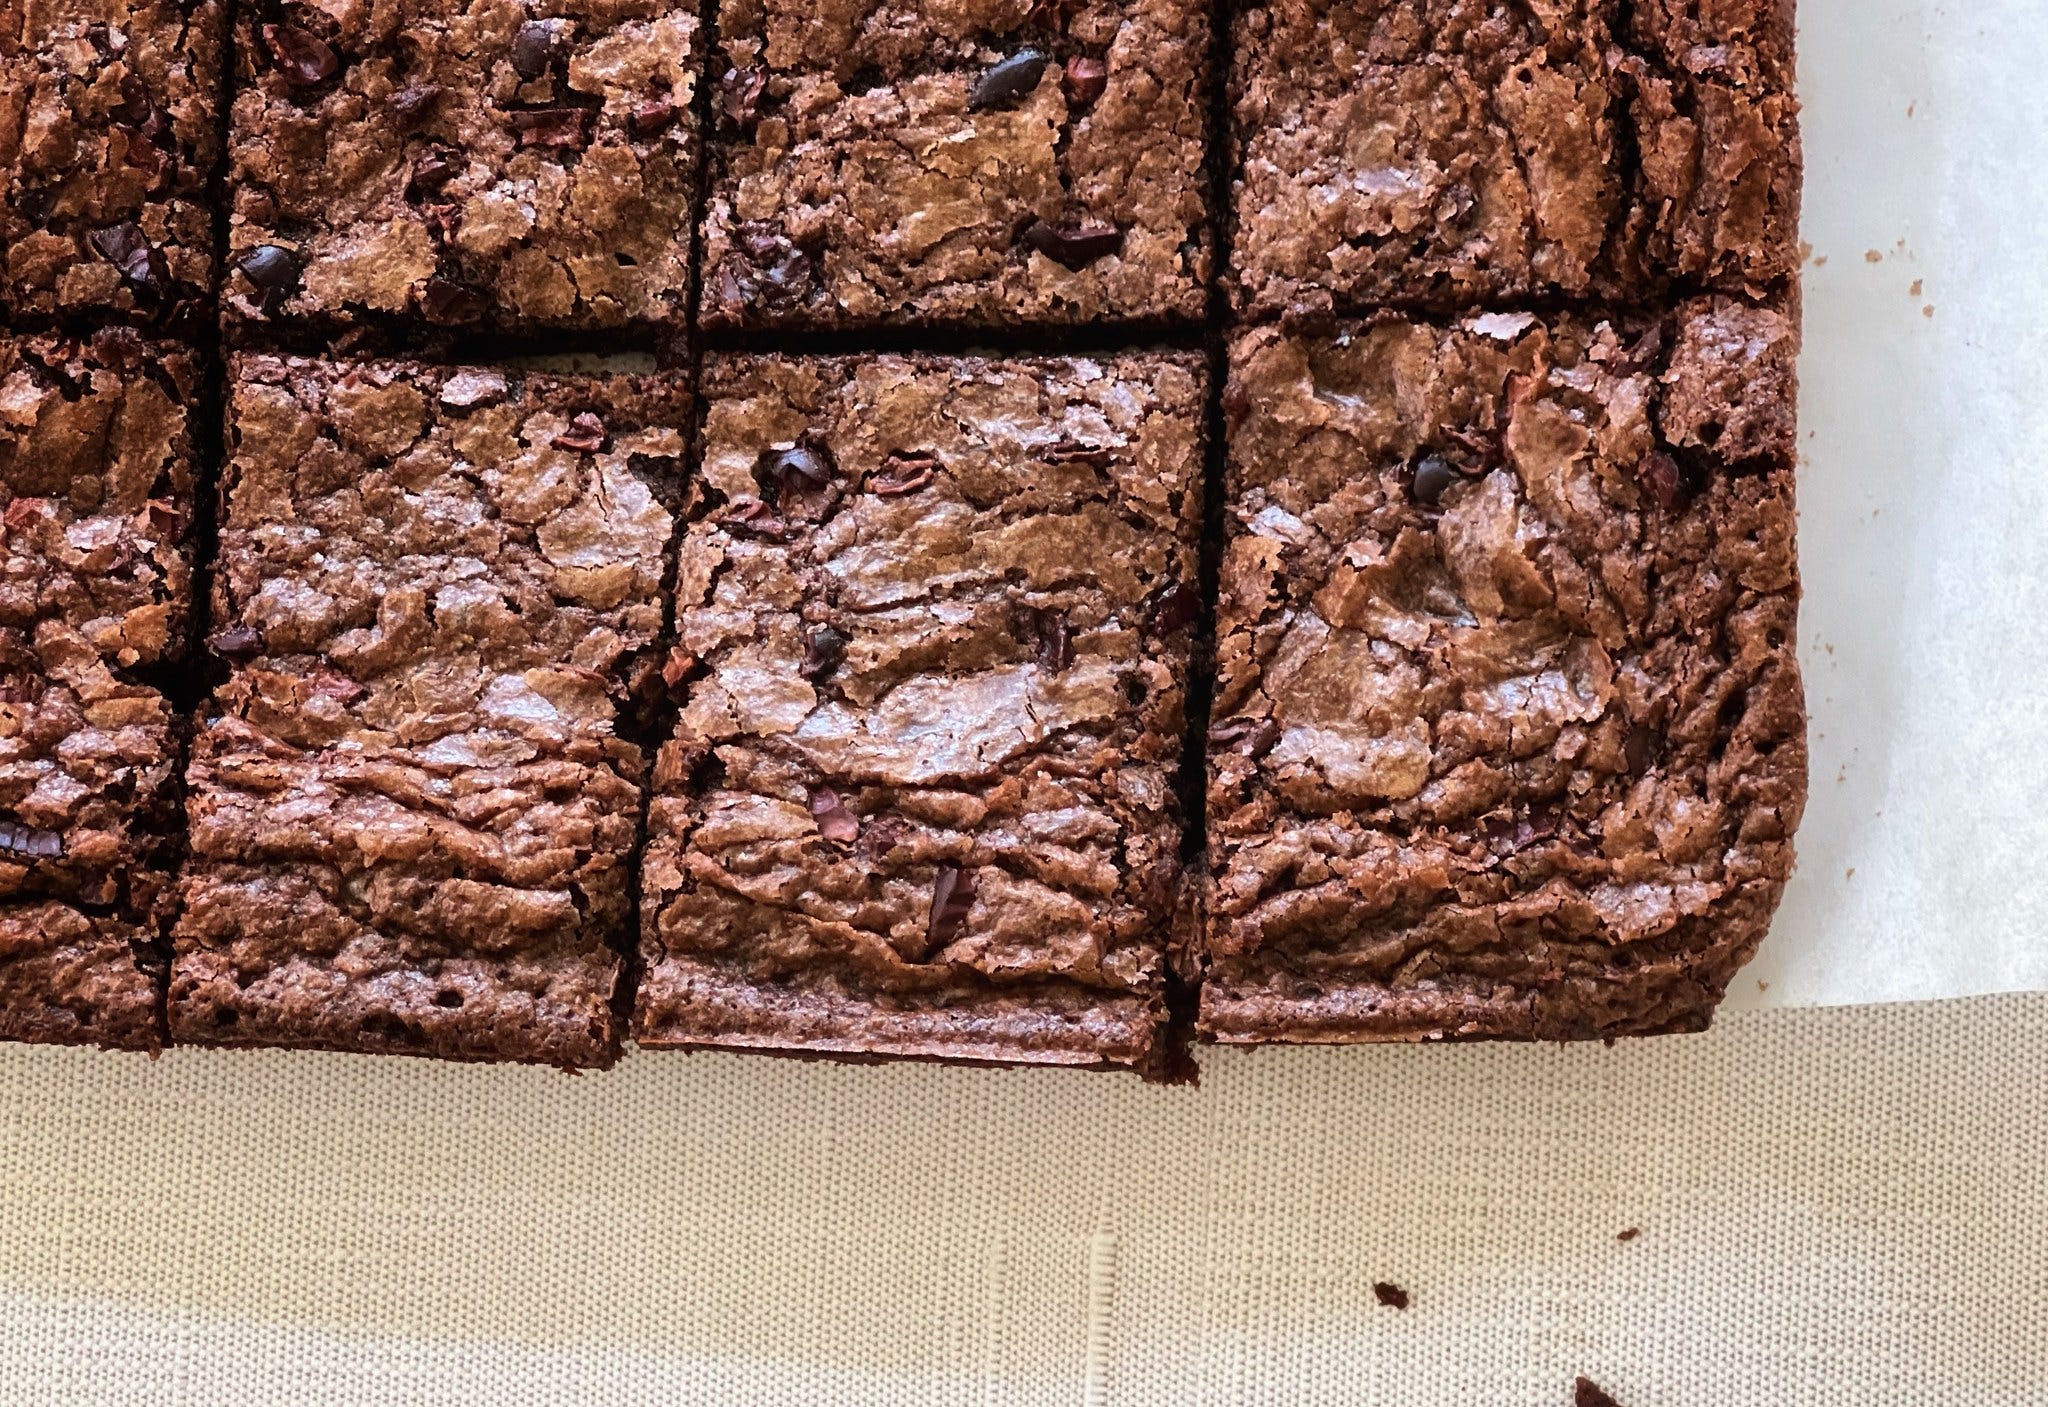 Deluxe 8-Inch Pan Brownies - Cookie Madness